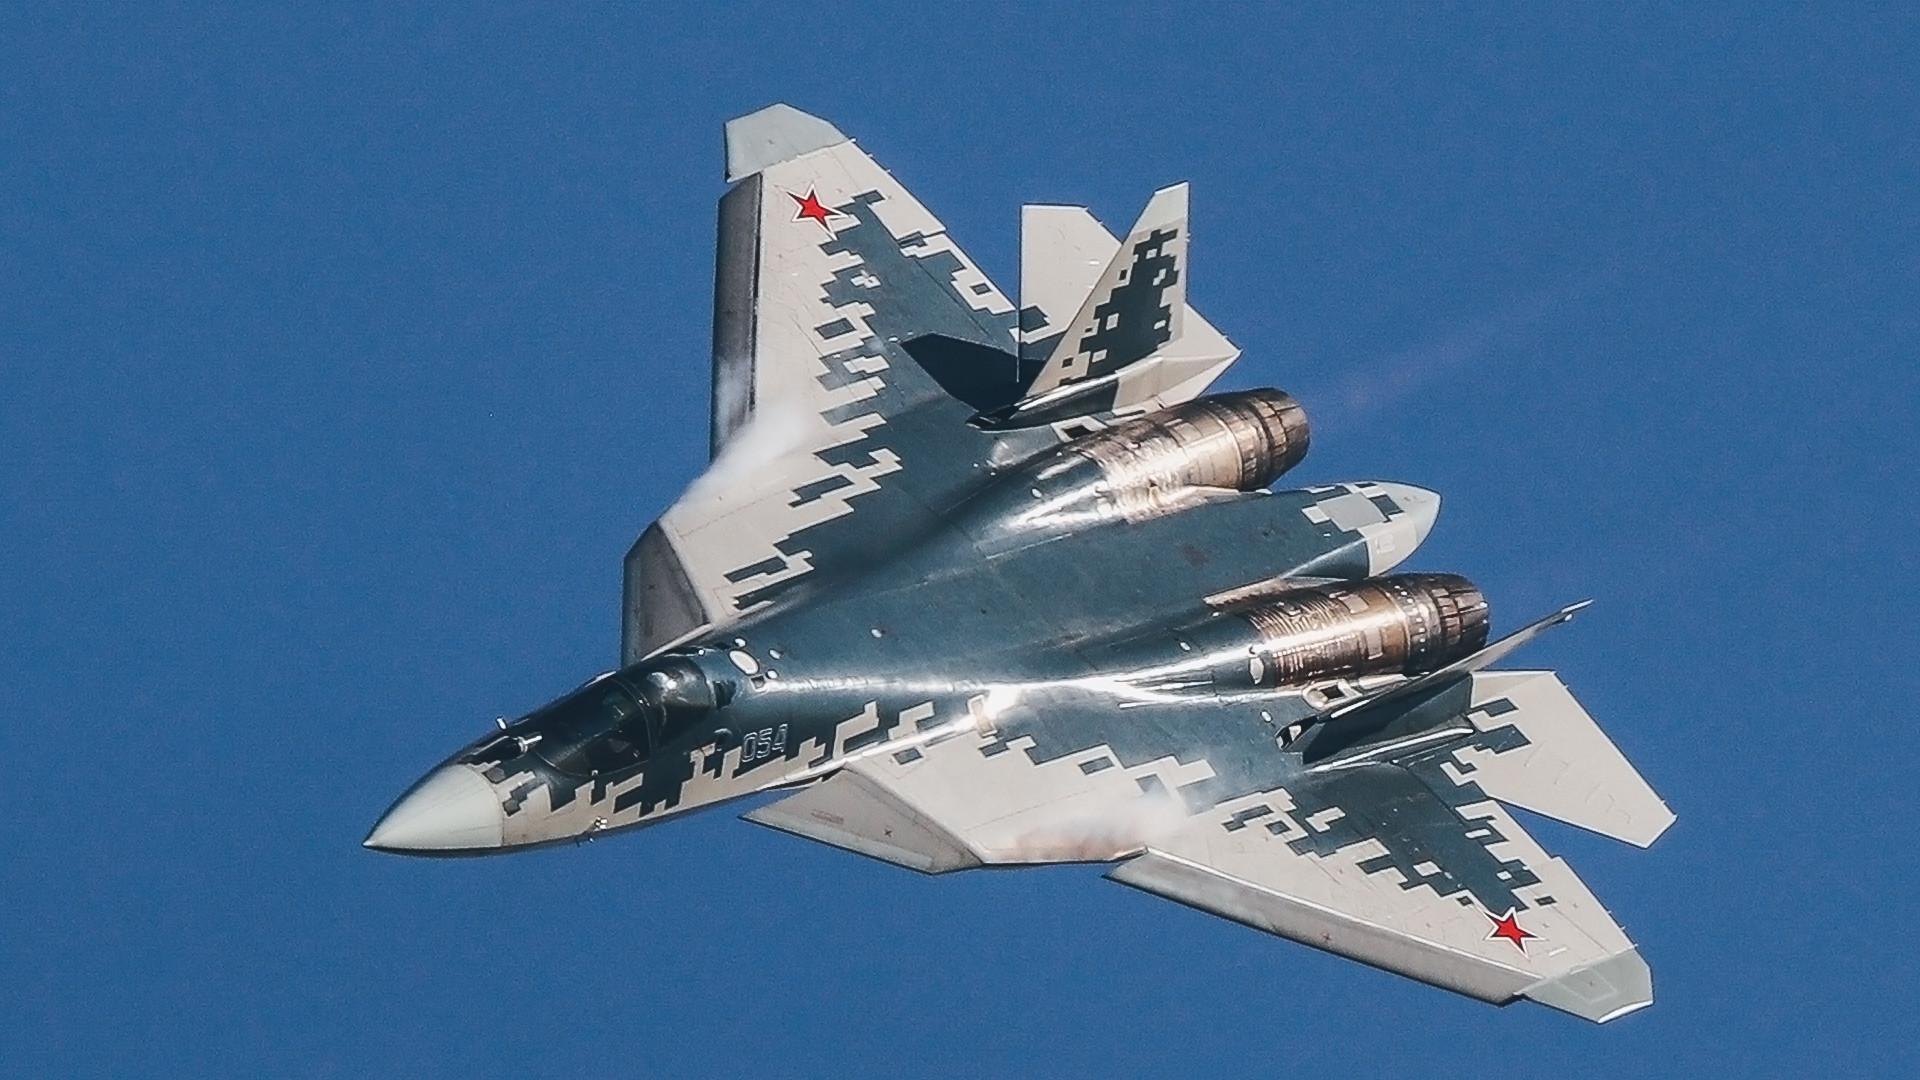 Why NATO is in awe of Sukhoi